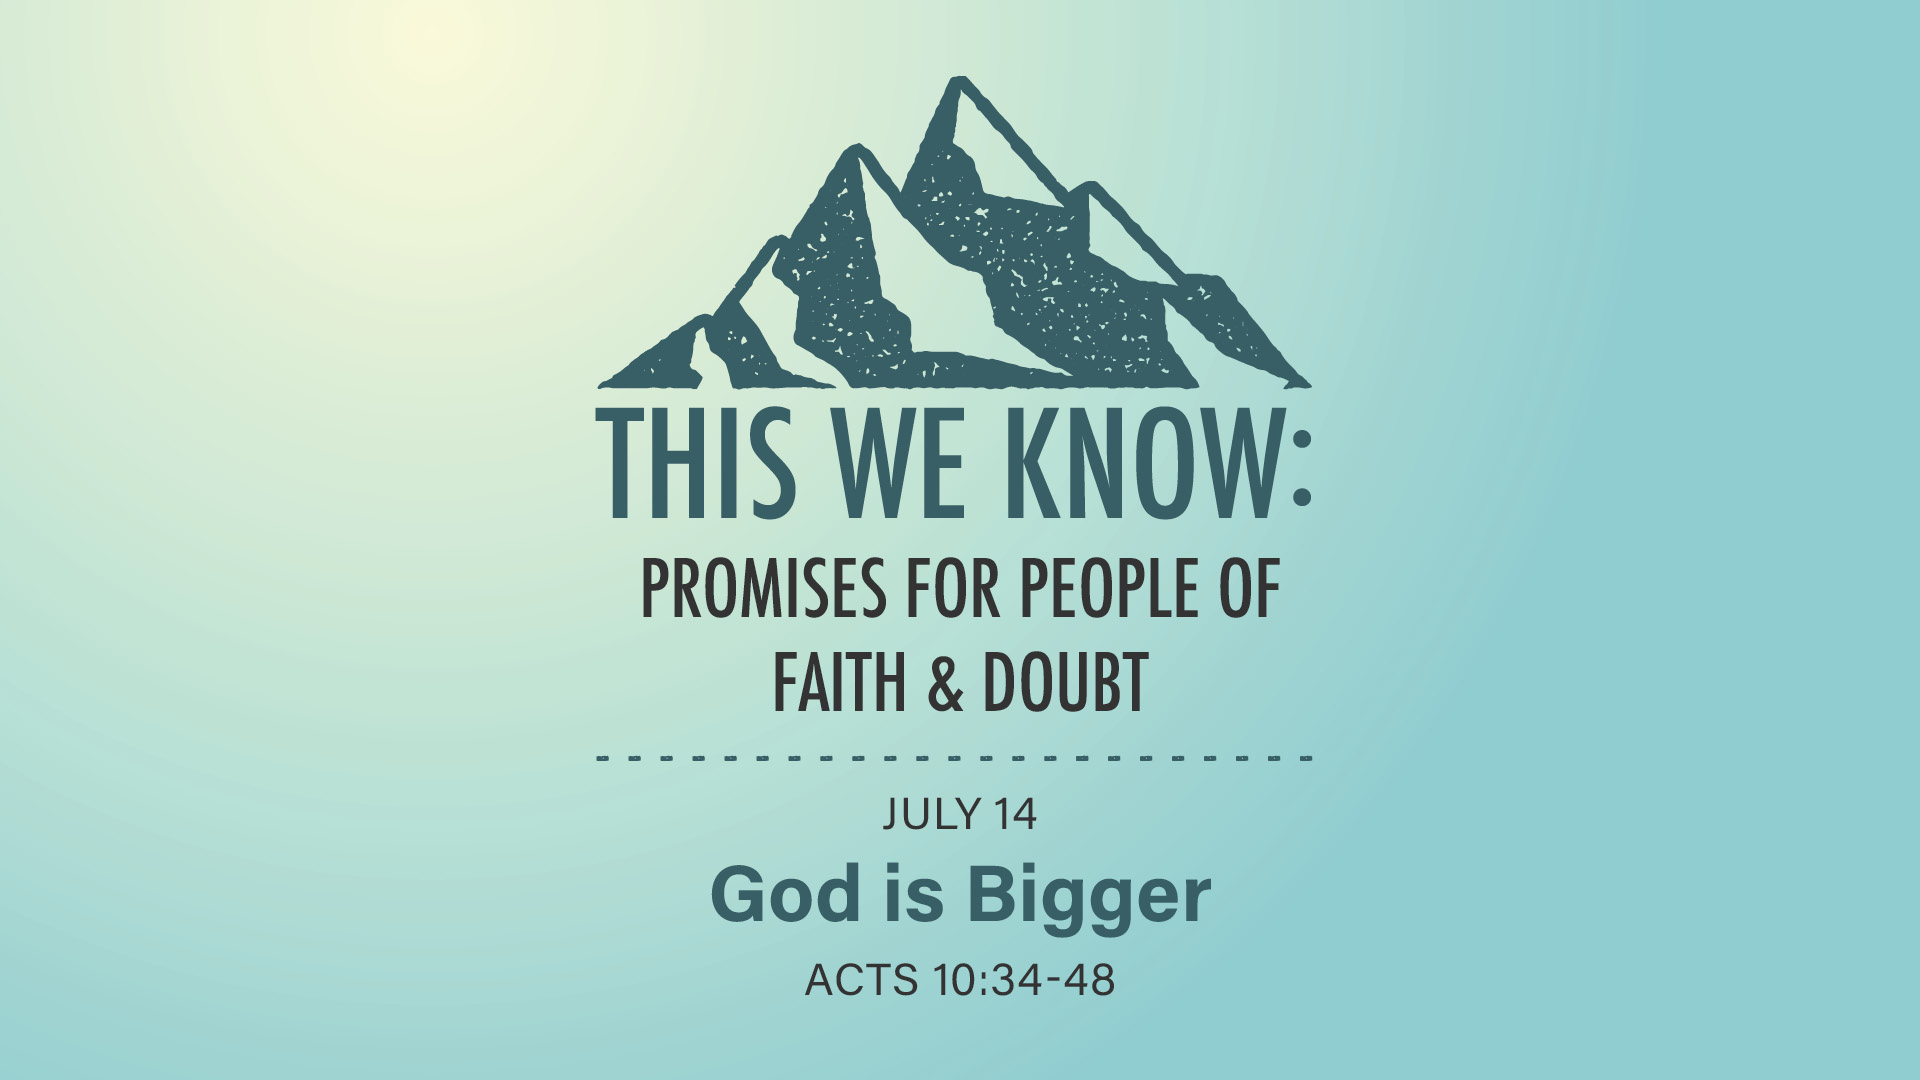 July 14 - This We Know: Promises for People of Faith & Doubt: God Is Bigger